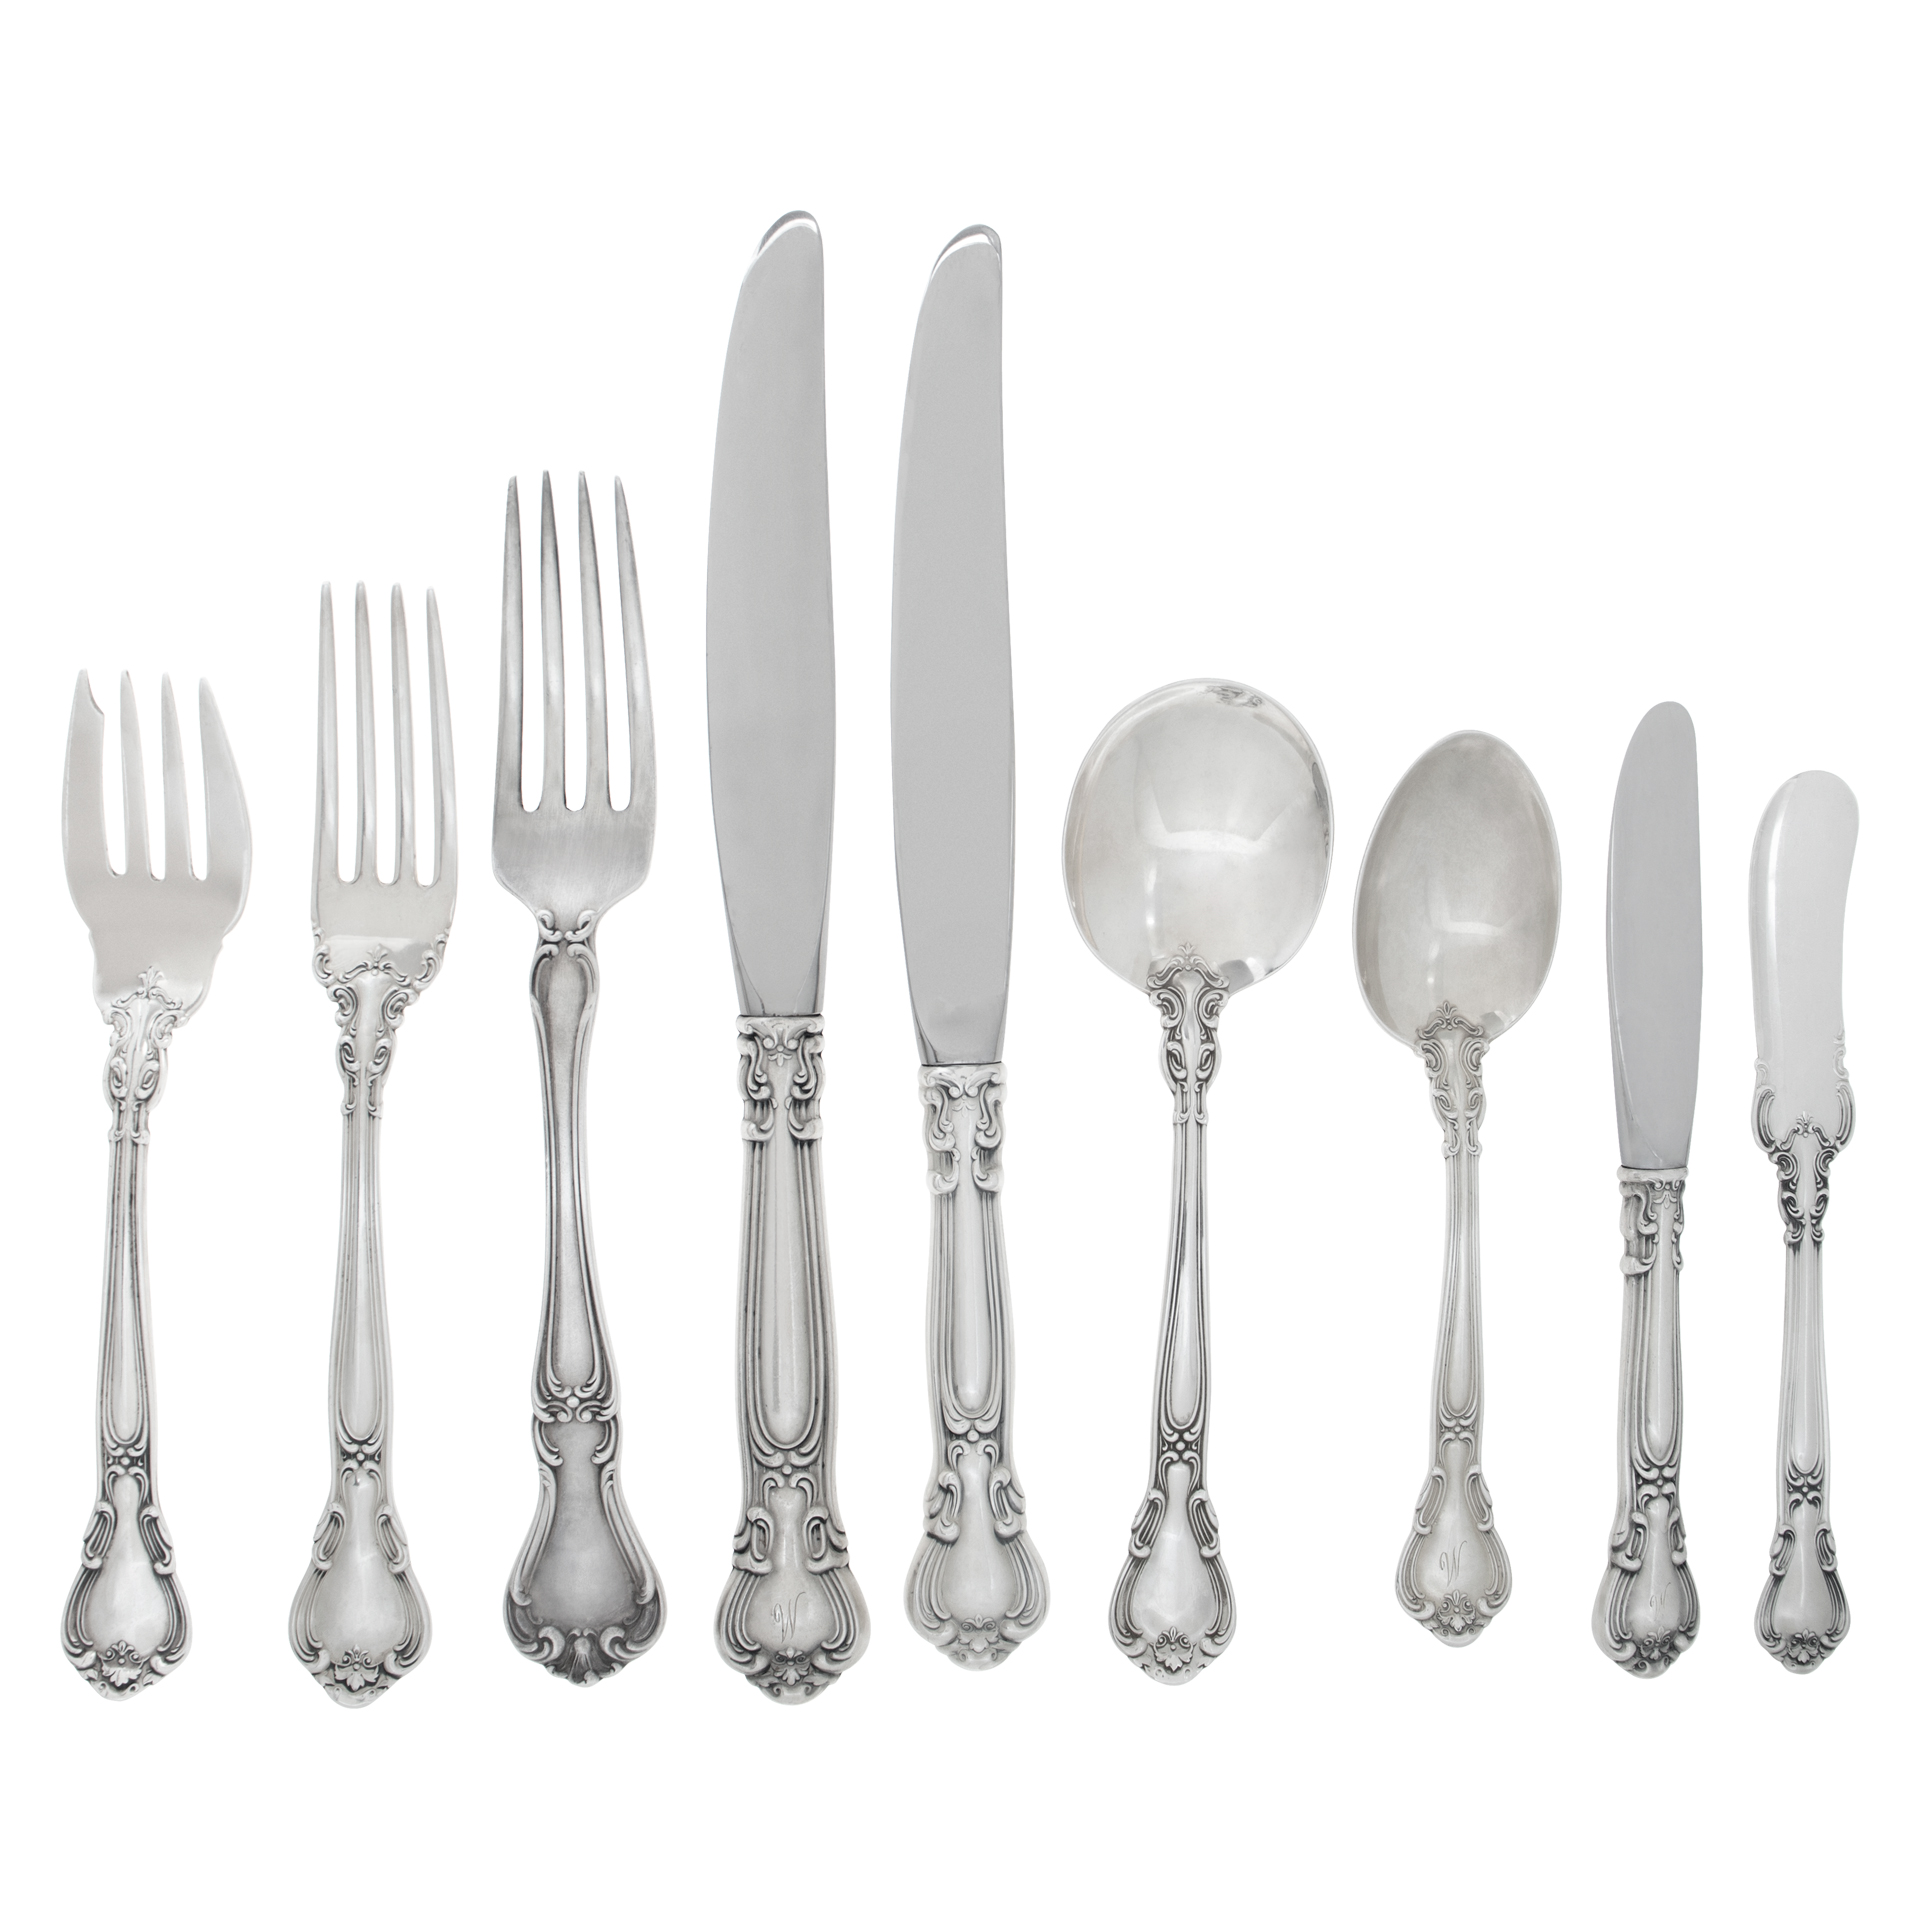 Antique CHANTILLY sterling flatware set patented in 1895 by Gorham. 100 pieces total. 8 place set for 8 (some for 10, some for 12) with 8 serving pieces.